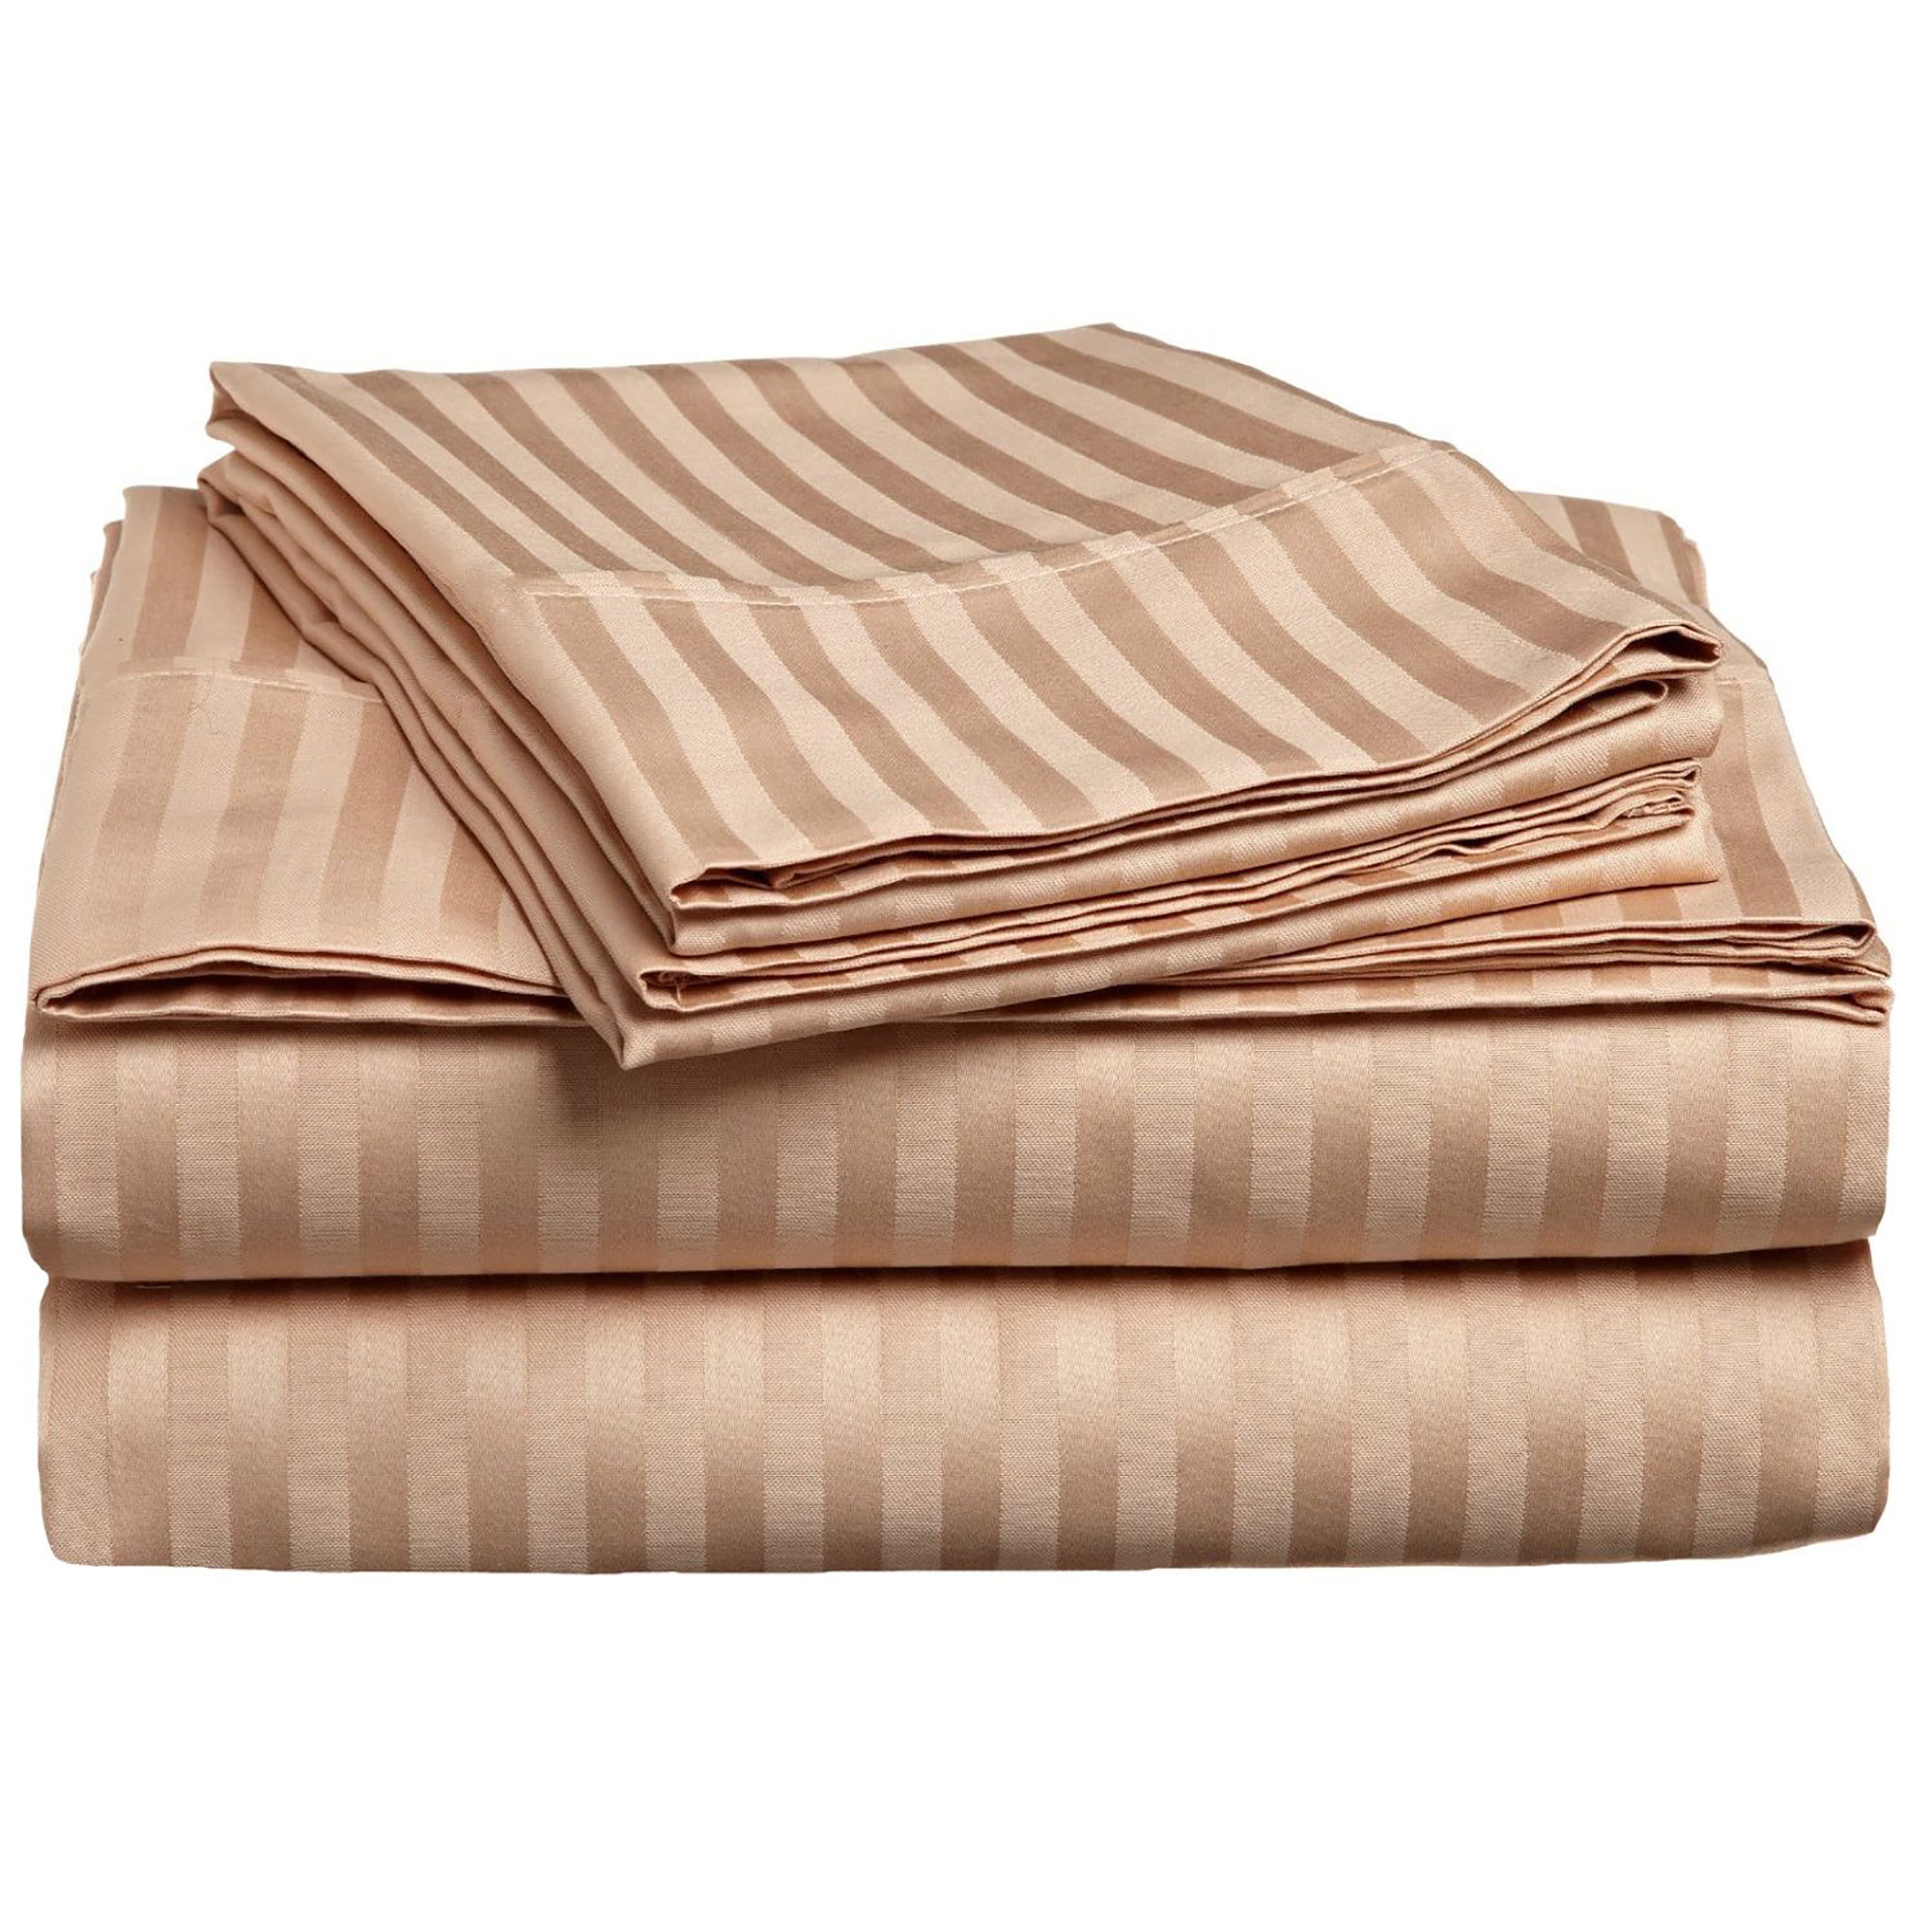 SUBTLE SHEEN STRIPE 300 THREAD COUNT CREAM EXTRA DEEP DOUBLE FITTED SHEET 